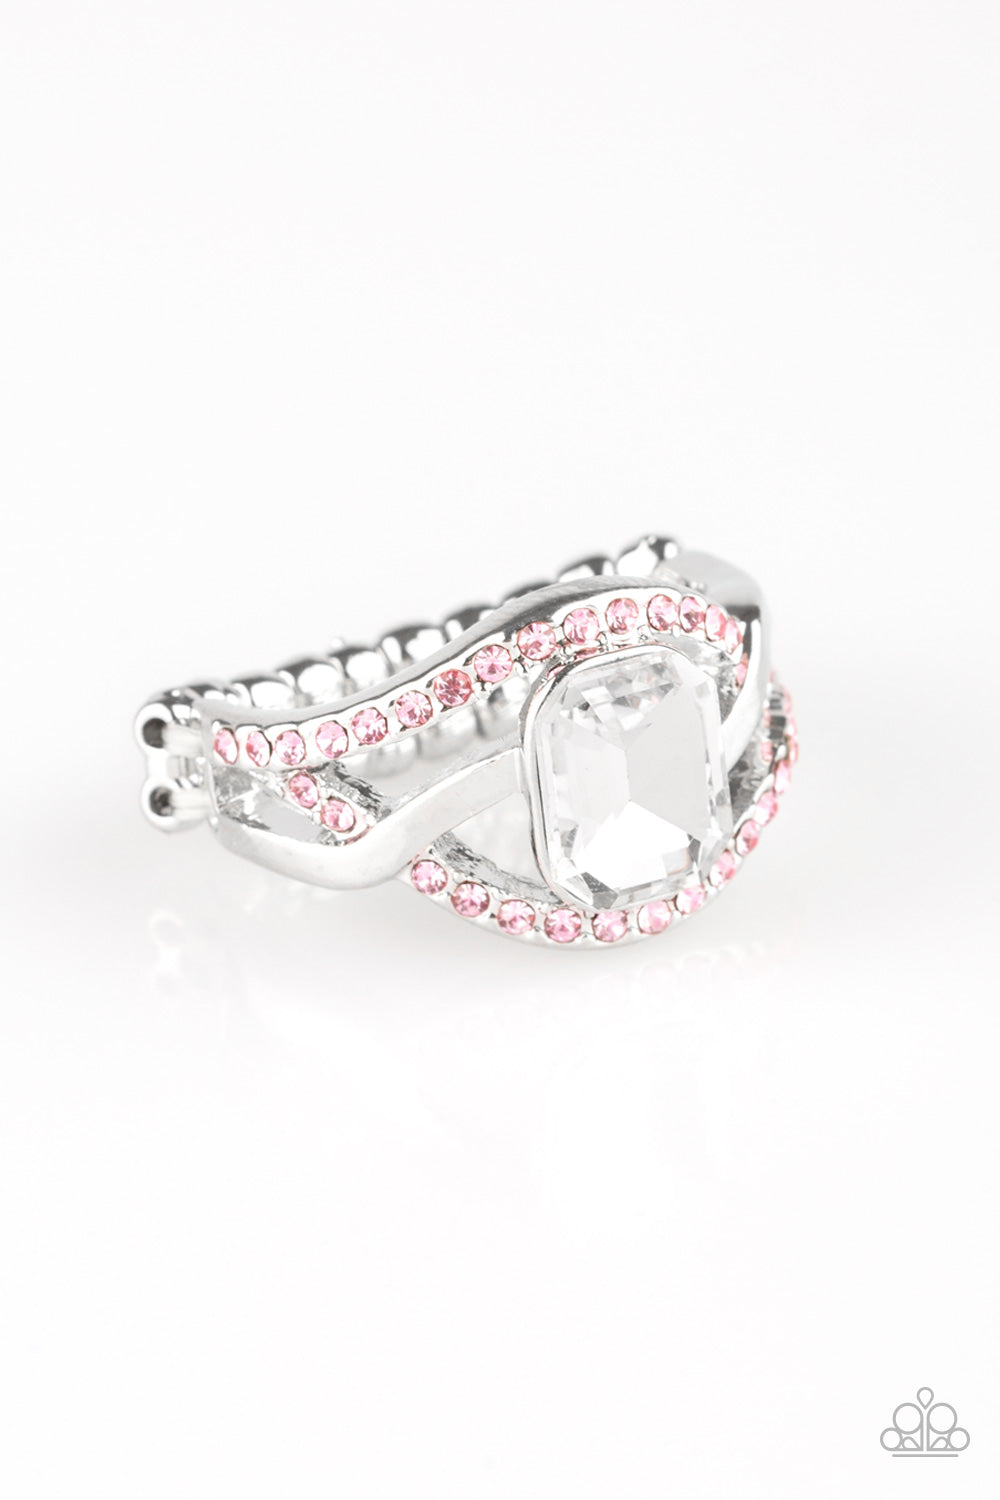 BLING It On! - Pink and White Rhinestone Ring - Paparazzi Accessories